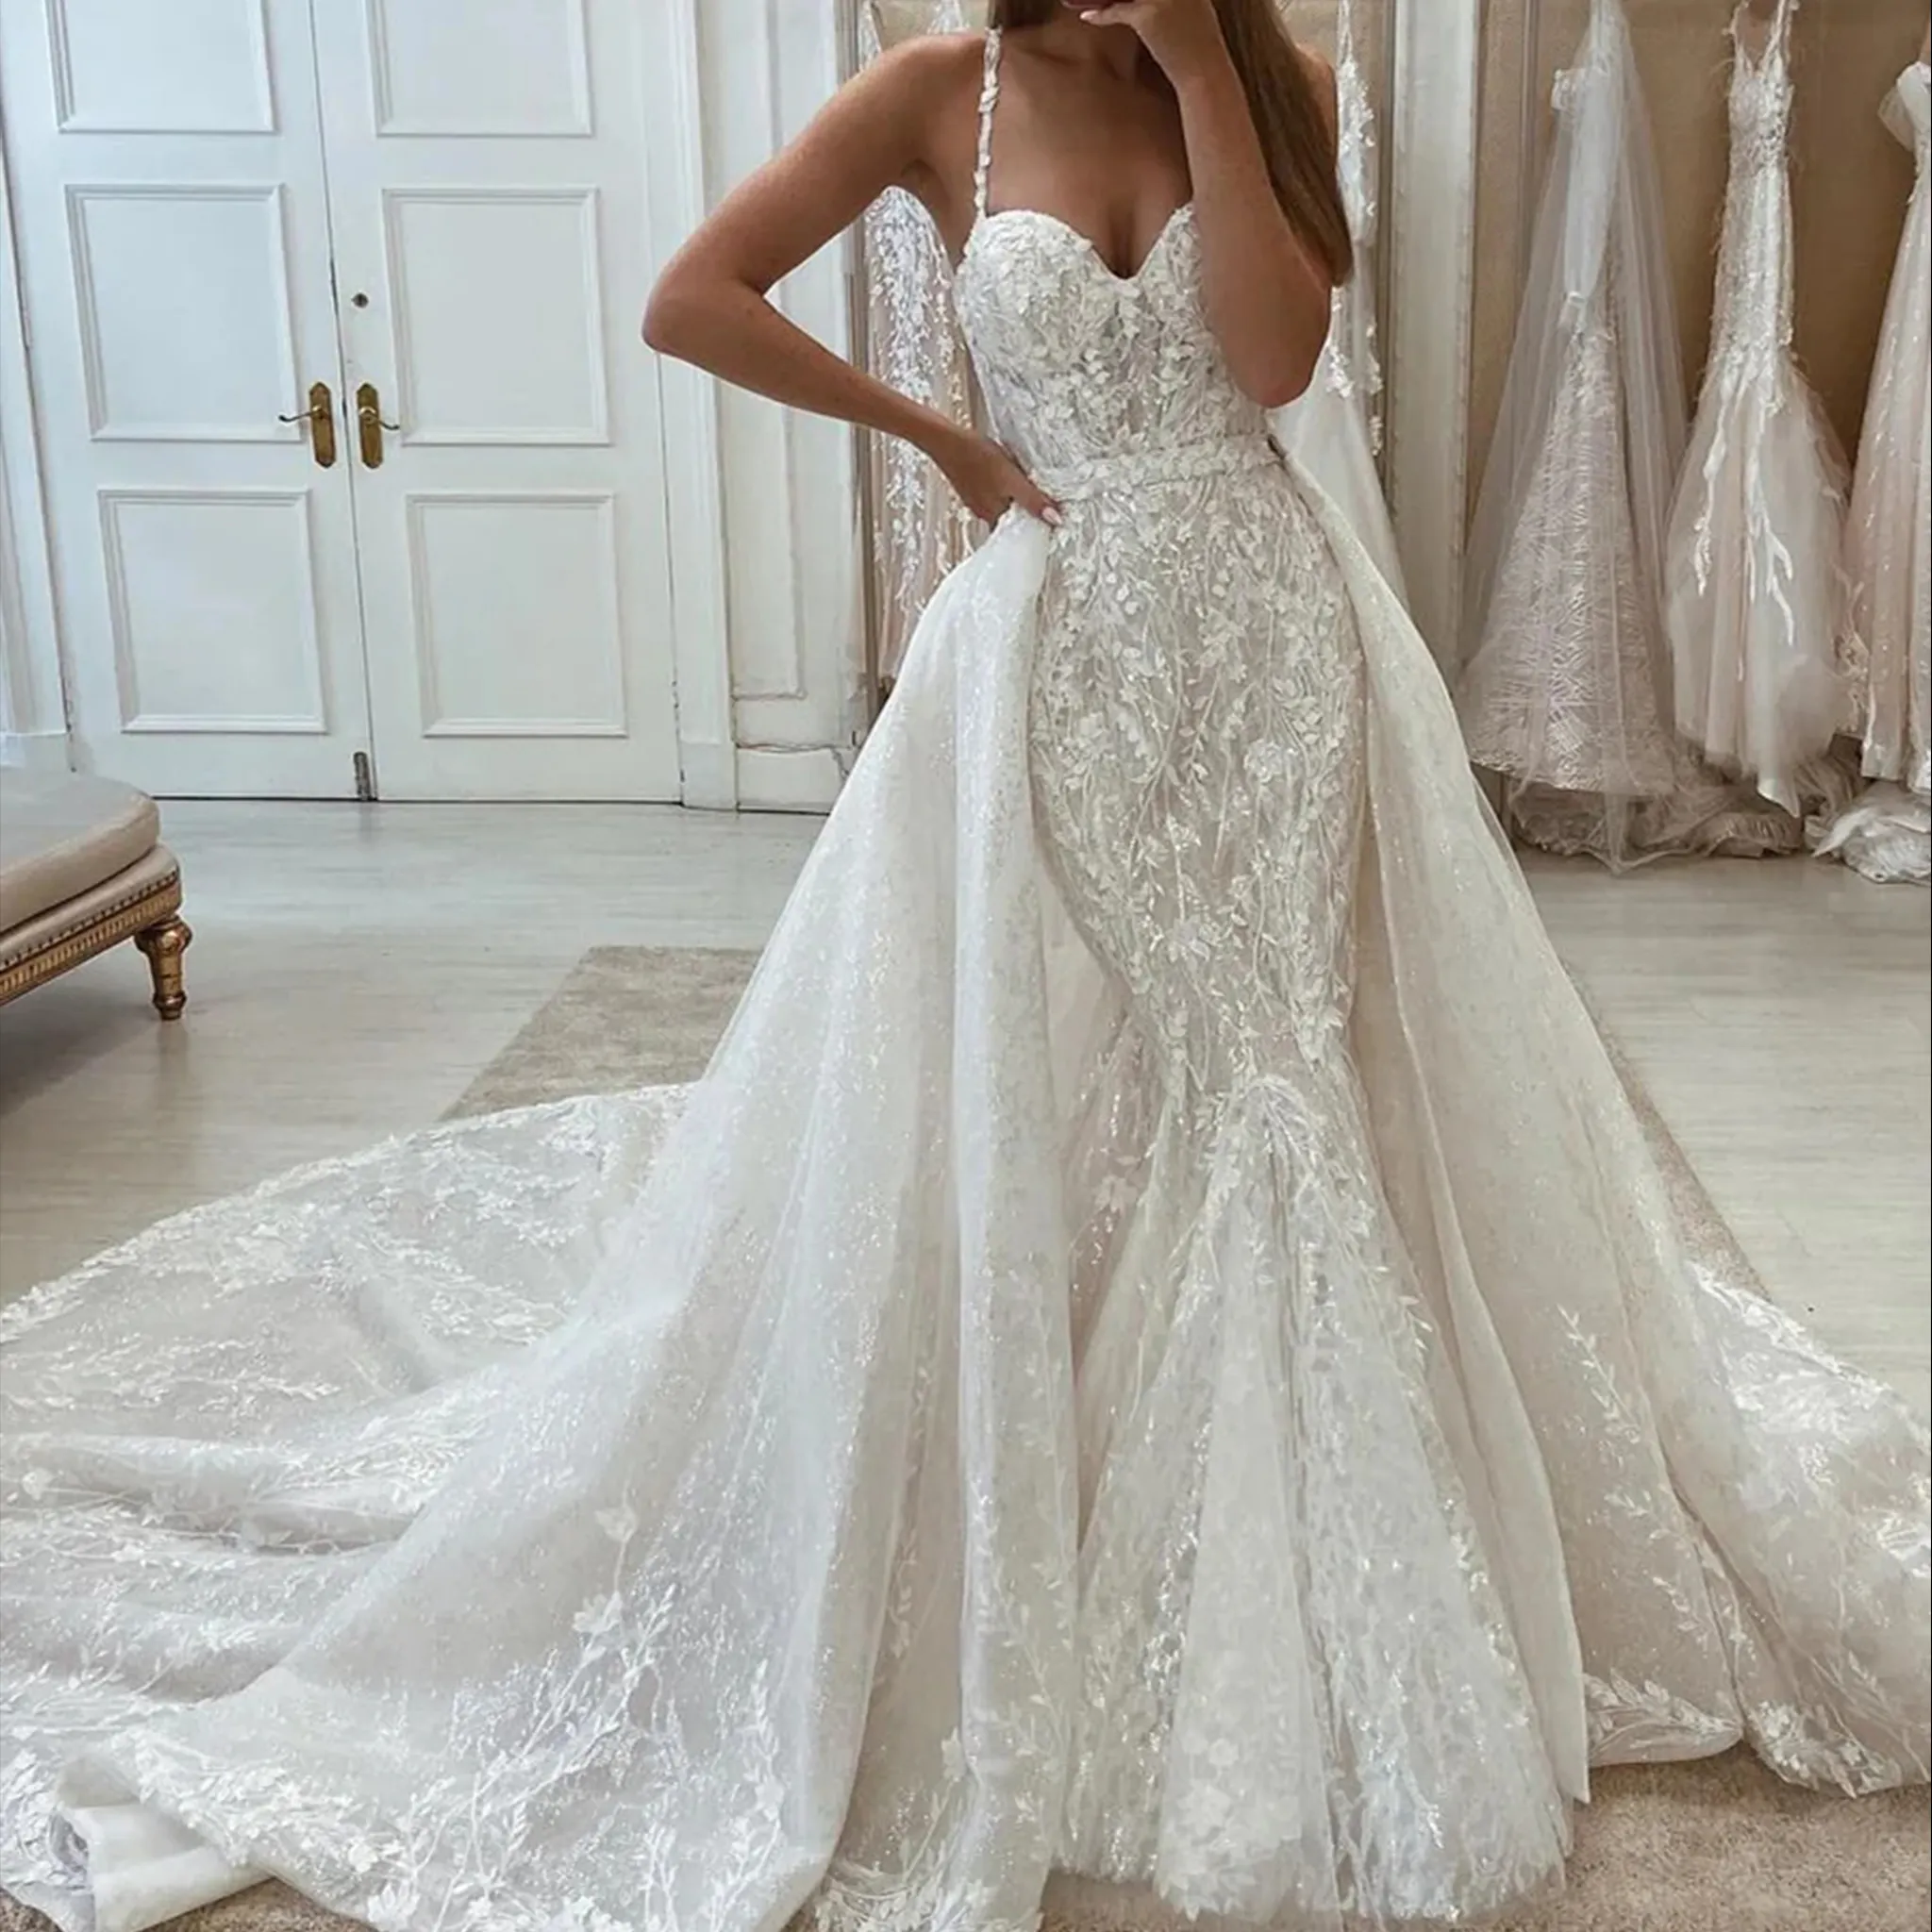 Sevintage Luxury Mermaid Wedding Dresses with Removable Train Lace Appliques Sweetheart Bridal Gowns Plus Size Wedding Dress